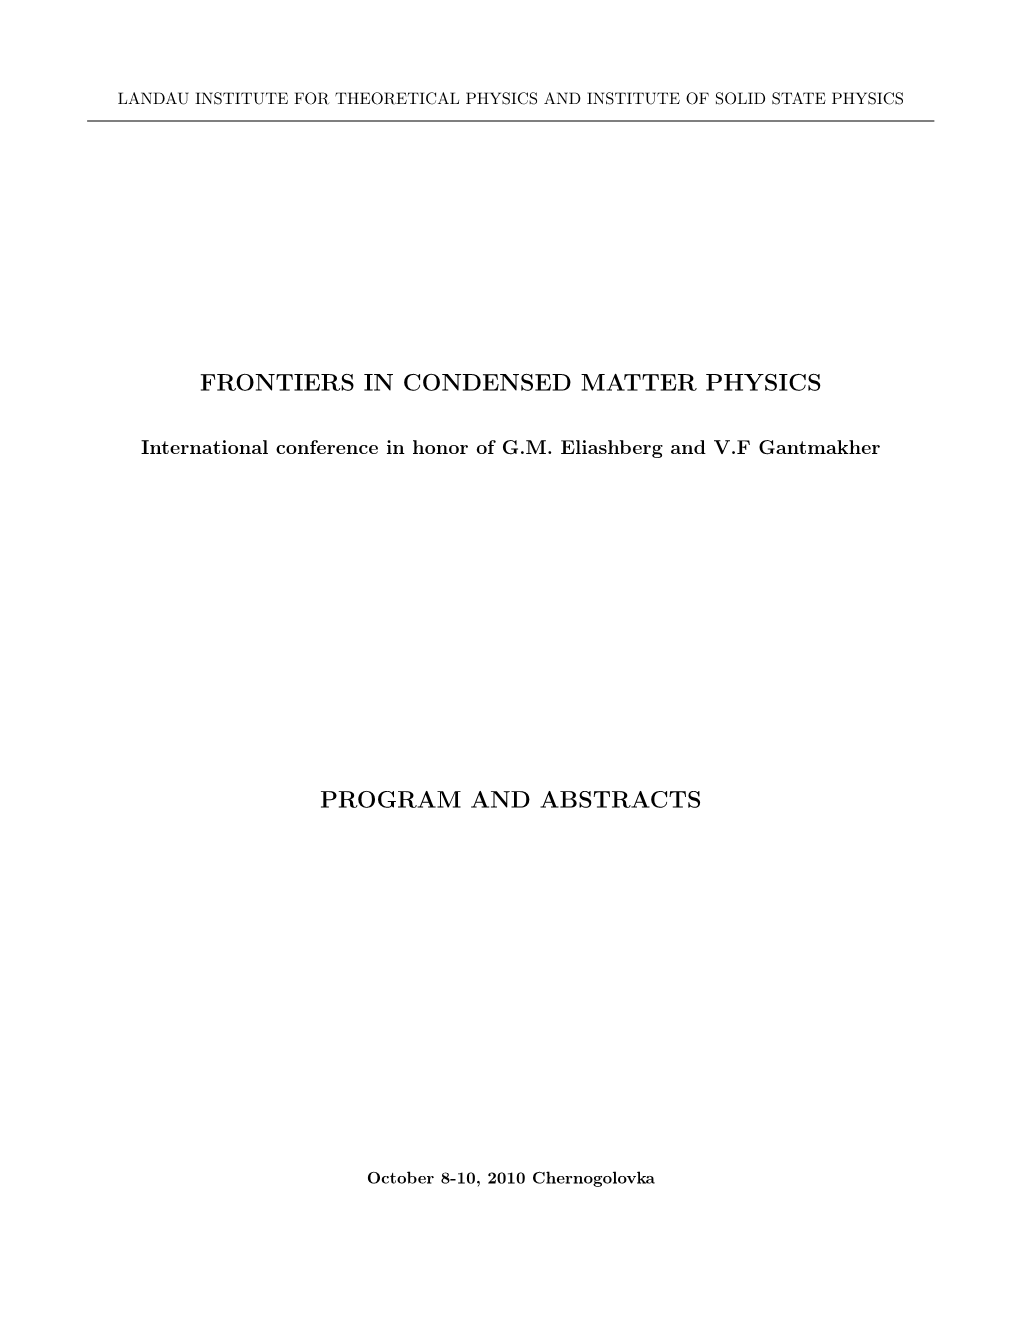 Frontiers in Condensed Matter Physics Program And